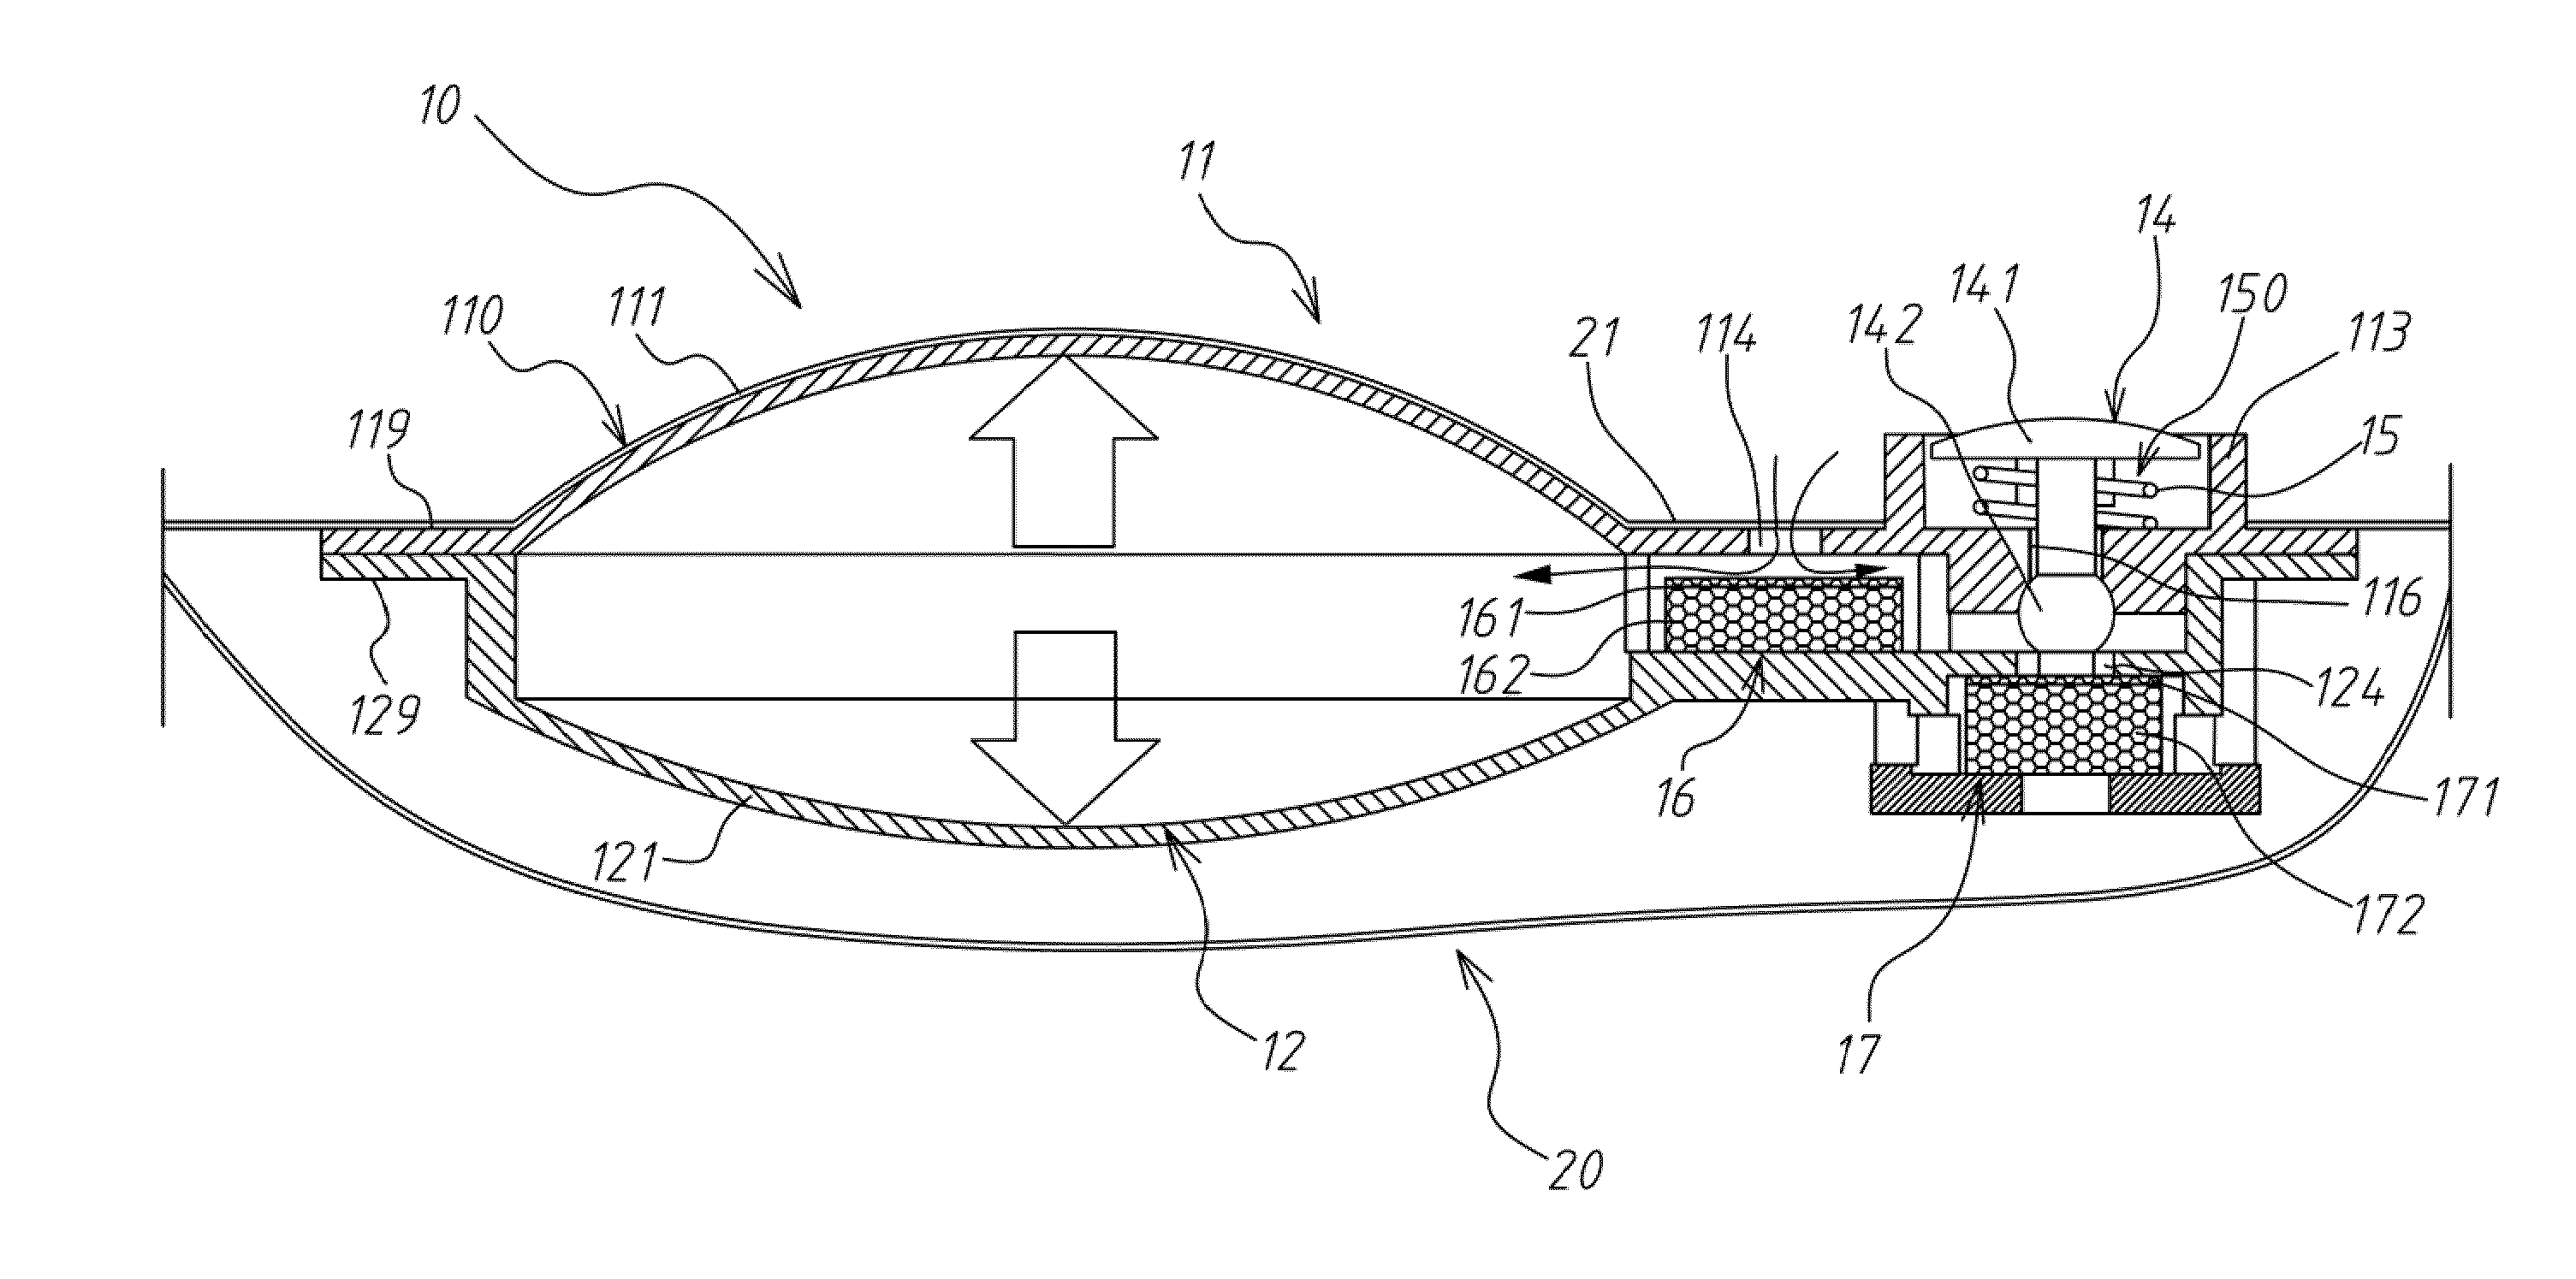 Inflating and deflating device for a pad